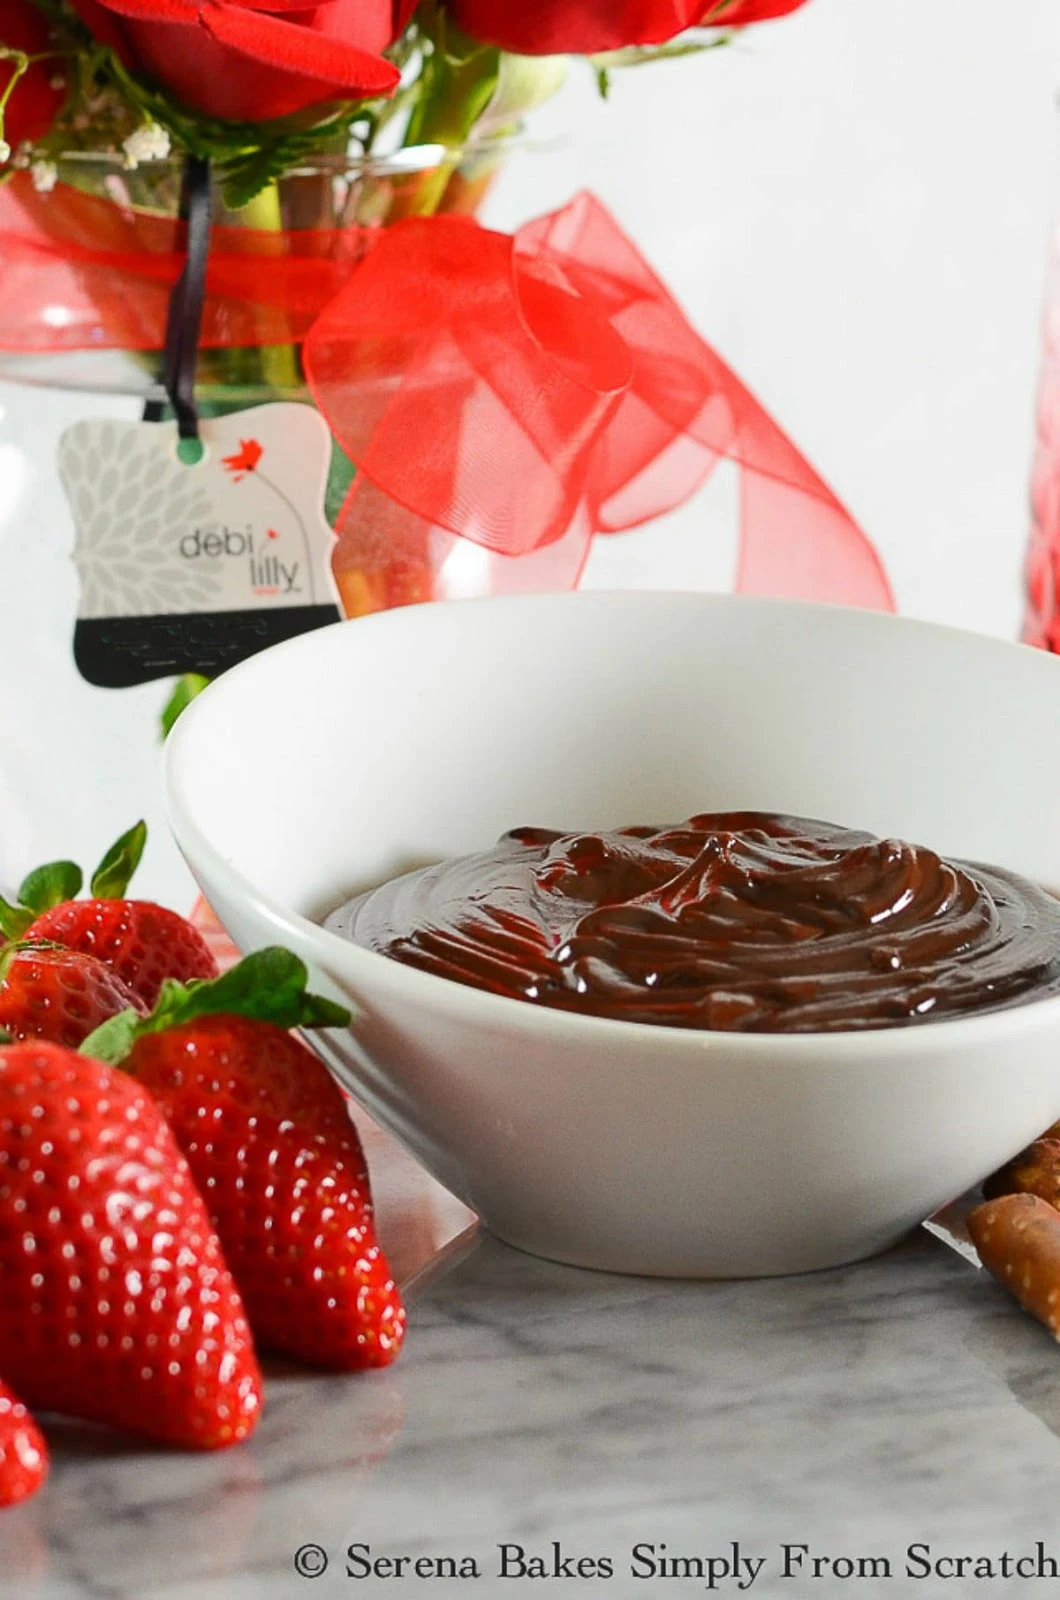 Hot Fudge Chocolate Fondue with strawberries and pretzel rods for dipping is a perfect dessert for Valentines Day or Easter from Serena Bakes Simply From Scratch.